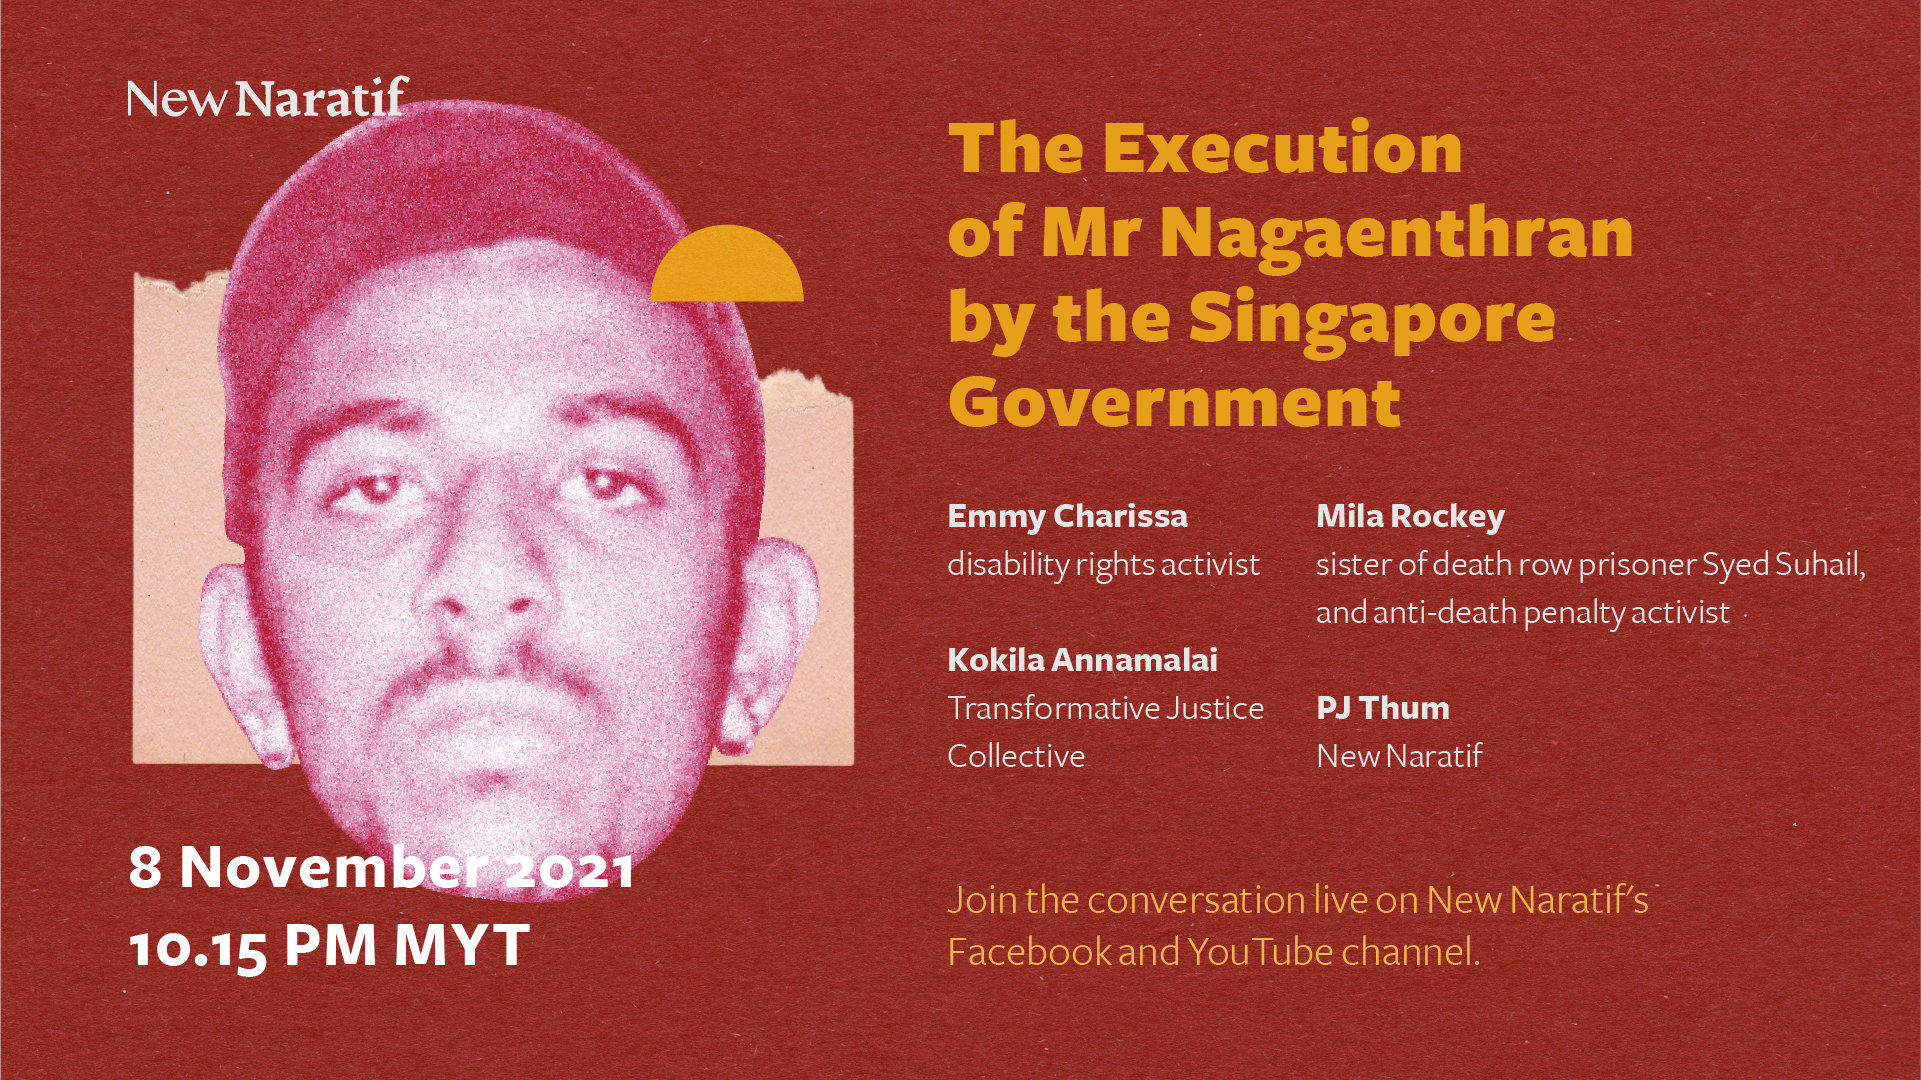 The Execution of Mr Nagaenthran by the Singapore Government. 8 November 2021, 10:15PM MYT